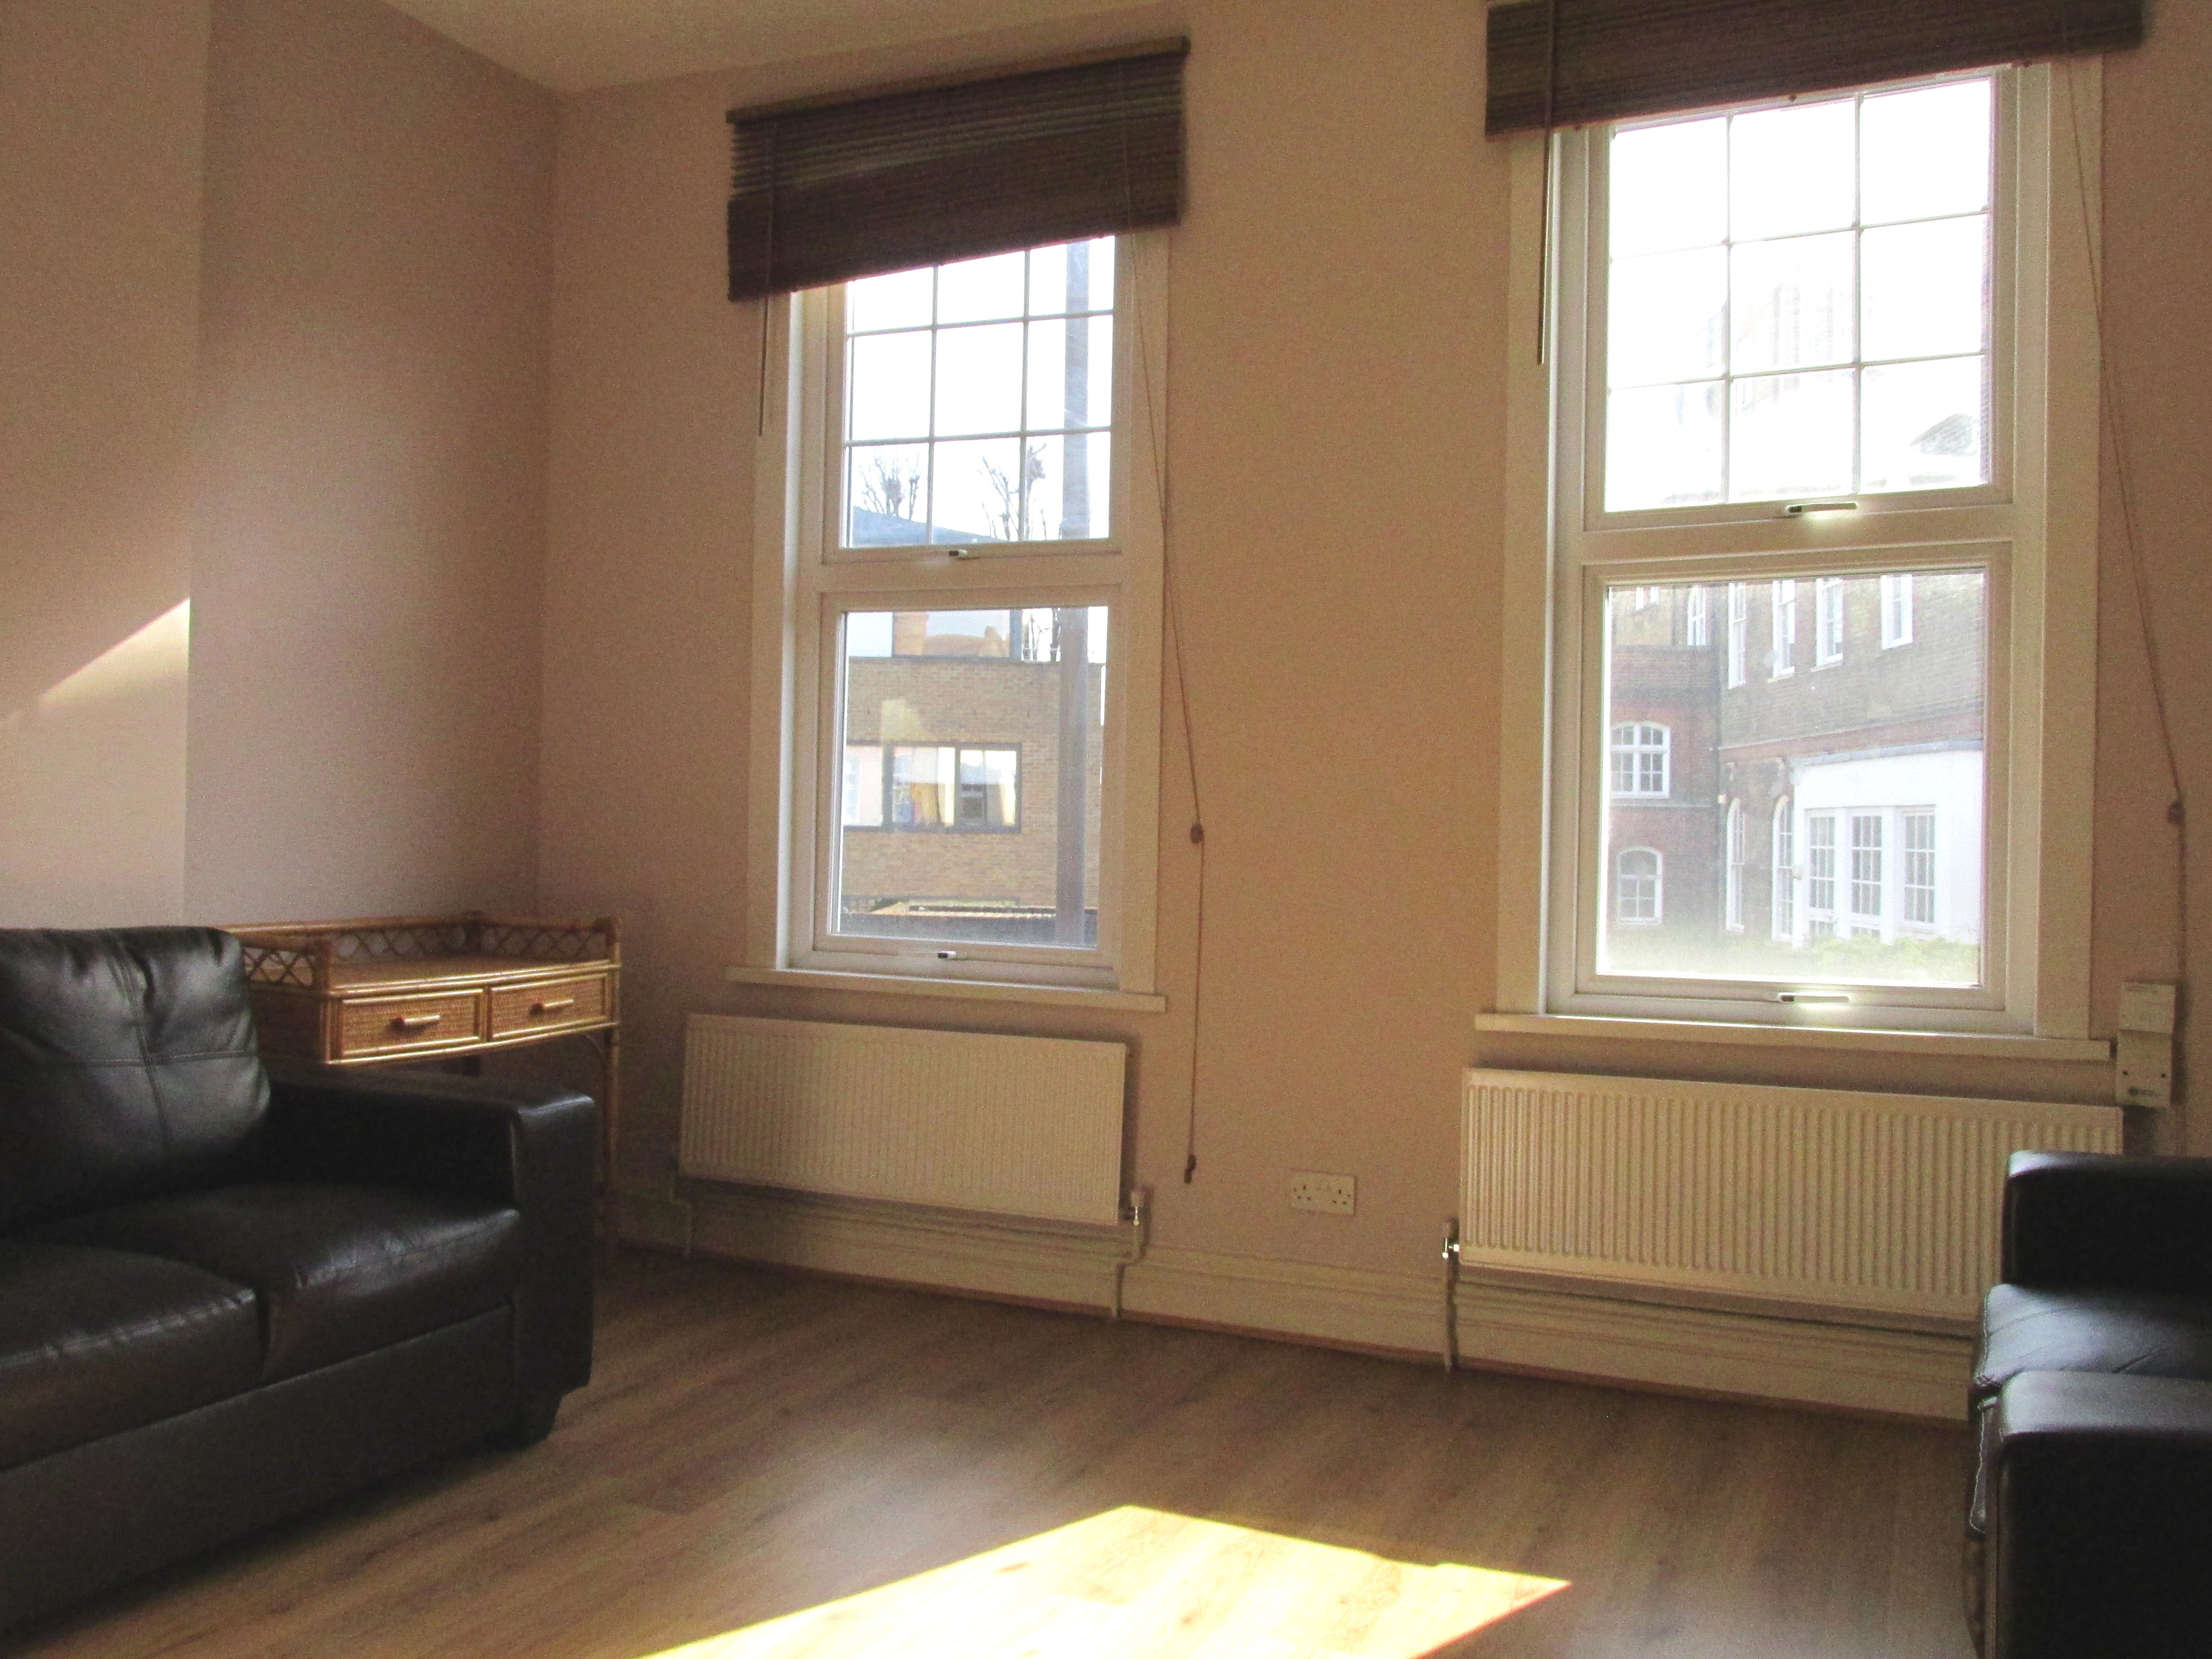 Next Location is pleased to present this stunning one bedroom maisonette apartment in Stoke Newington N16.